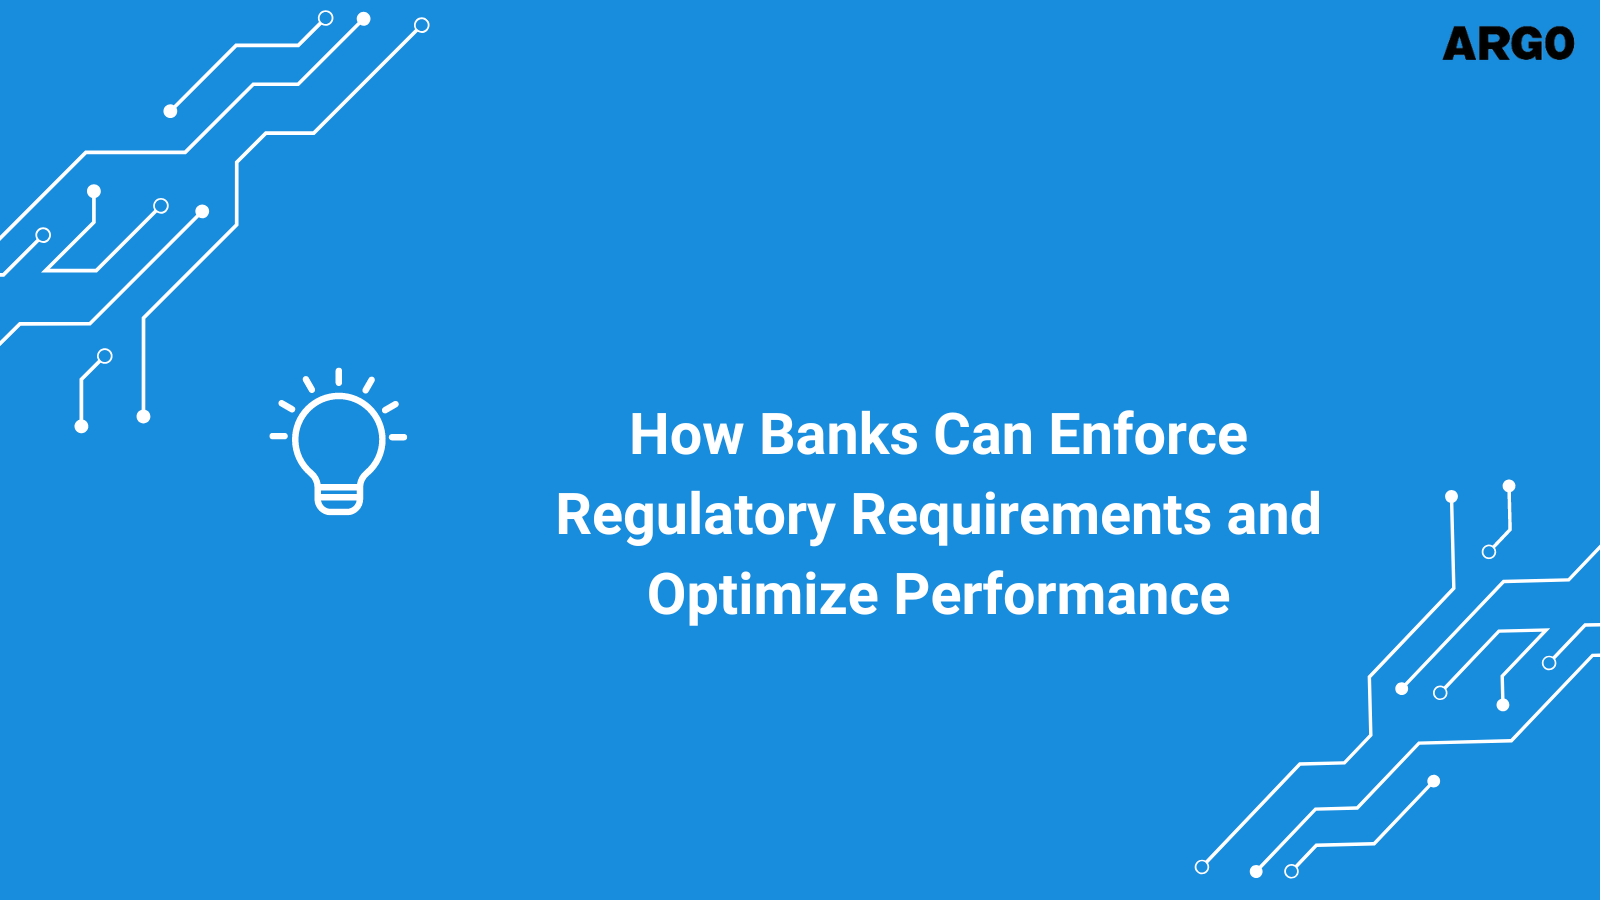 How Banks Can Enforce Regulatory Requirements and Optimize Performance